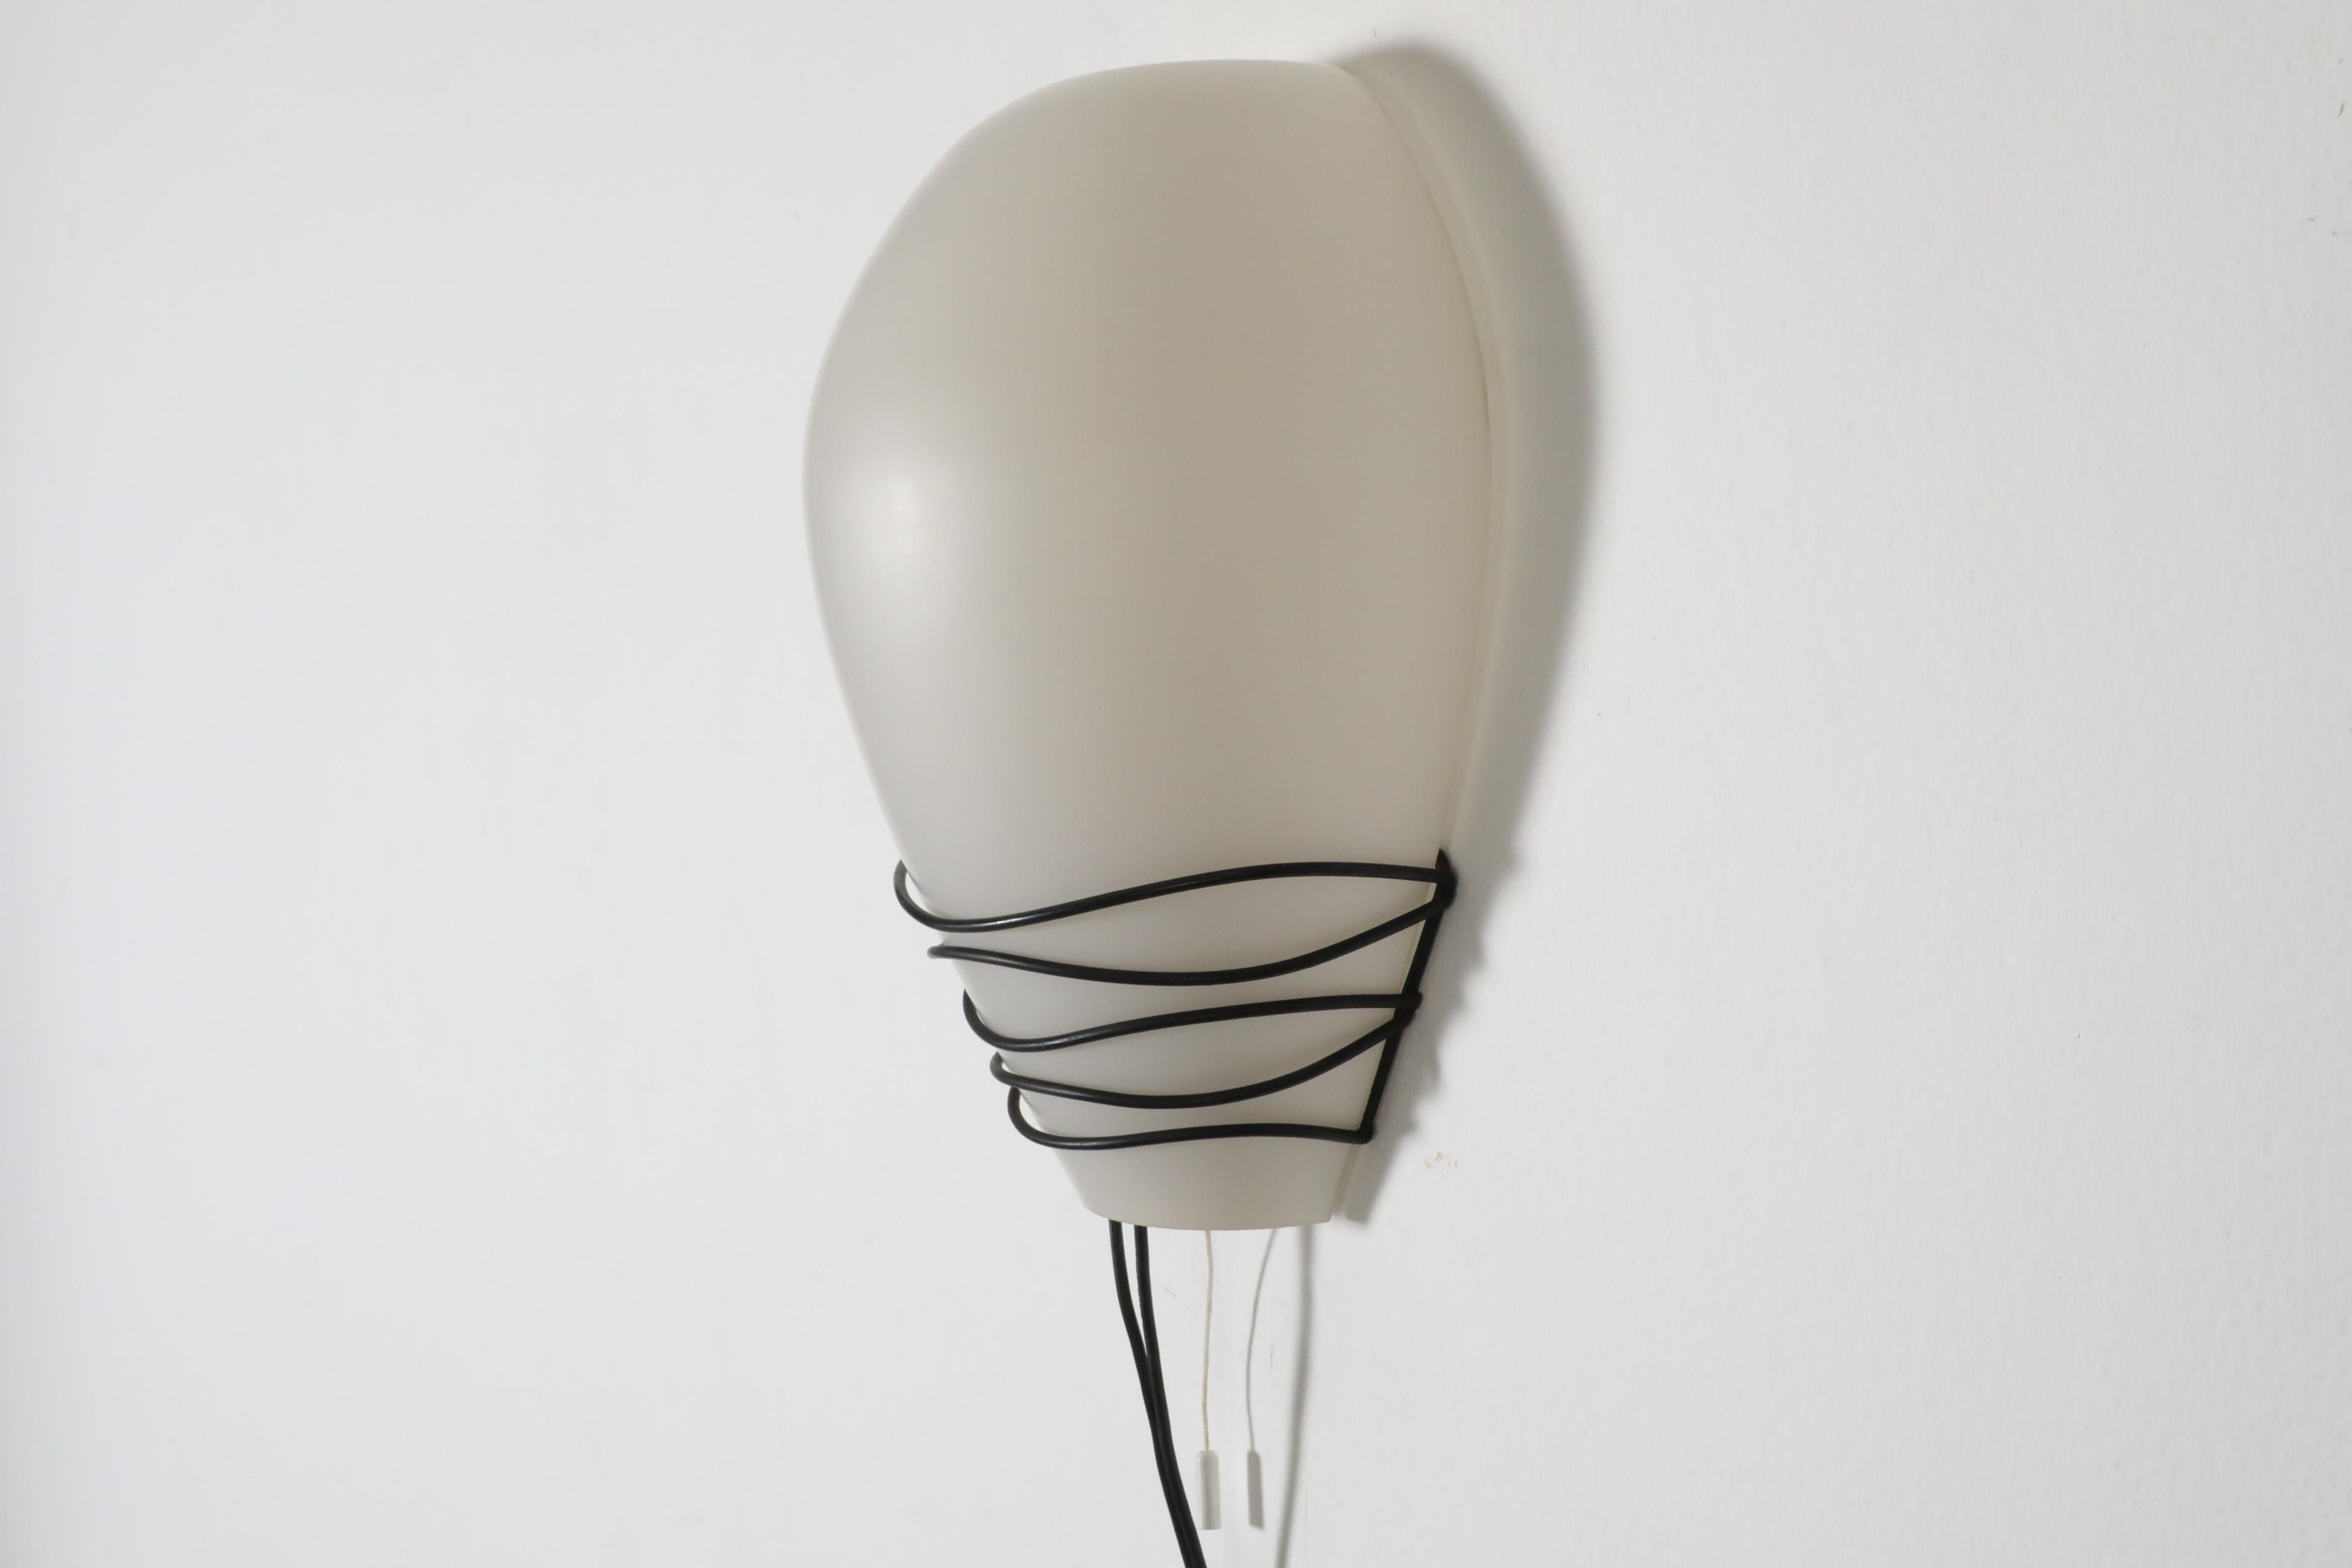 Philips Milk Glass Wall Sconce w/ Black Wire Mount and Milk Glass Shade, 1950's For Sale 2